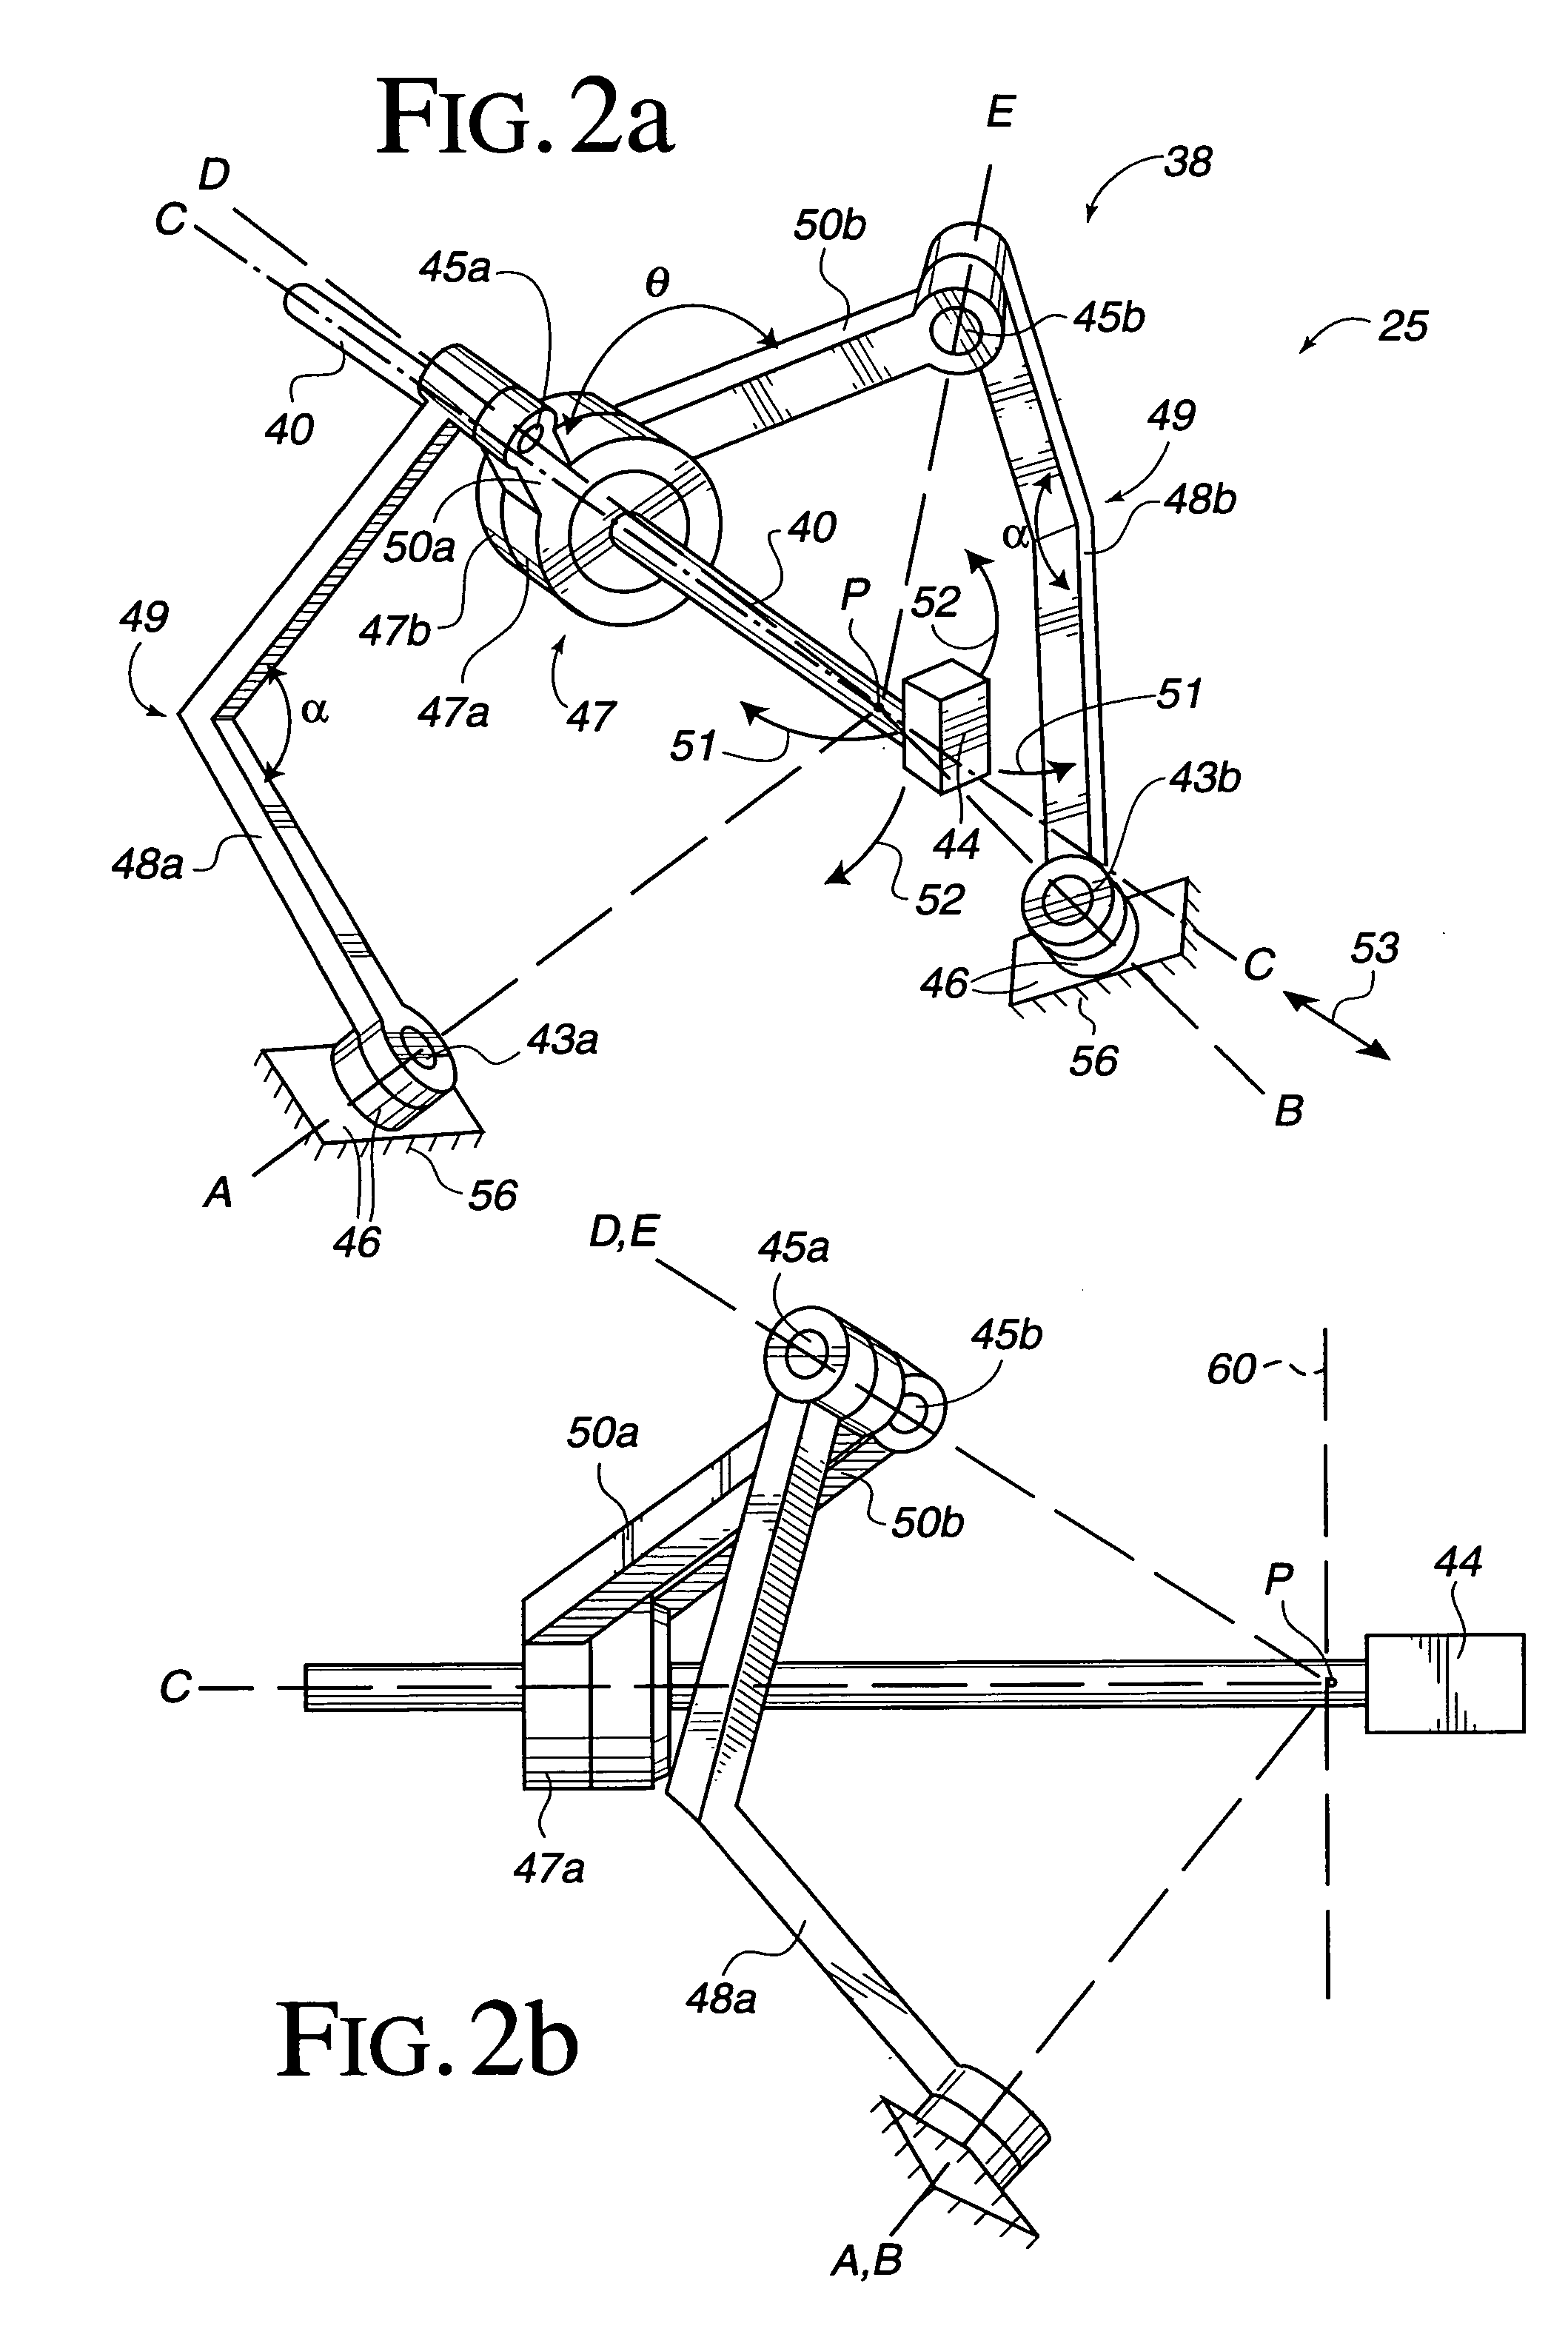 Method and apparatus for providing an interface mechanism for a computer simulation